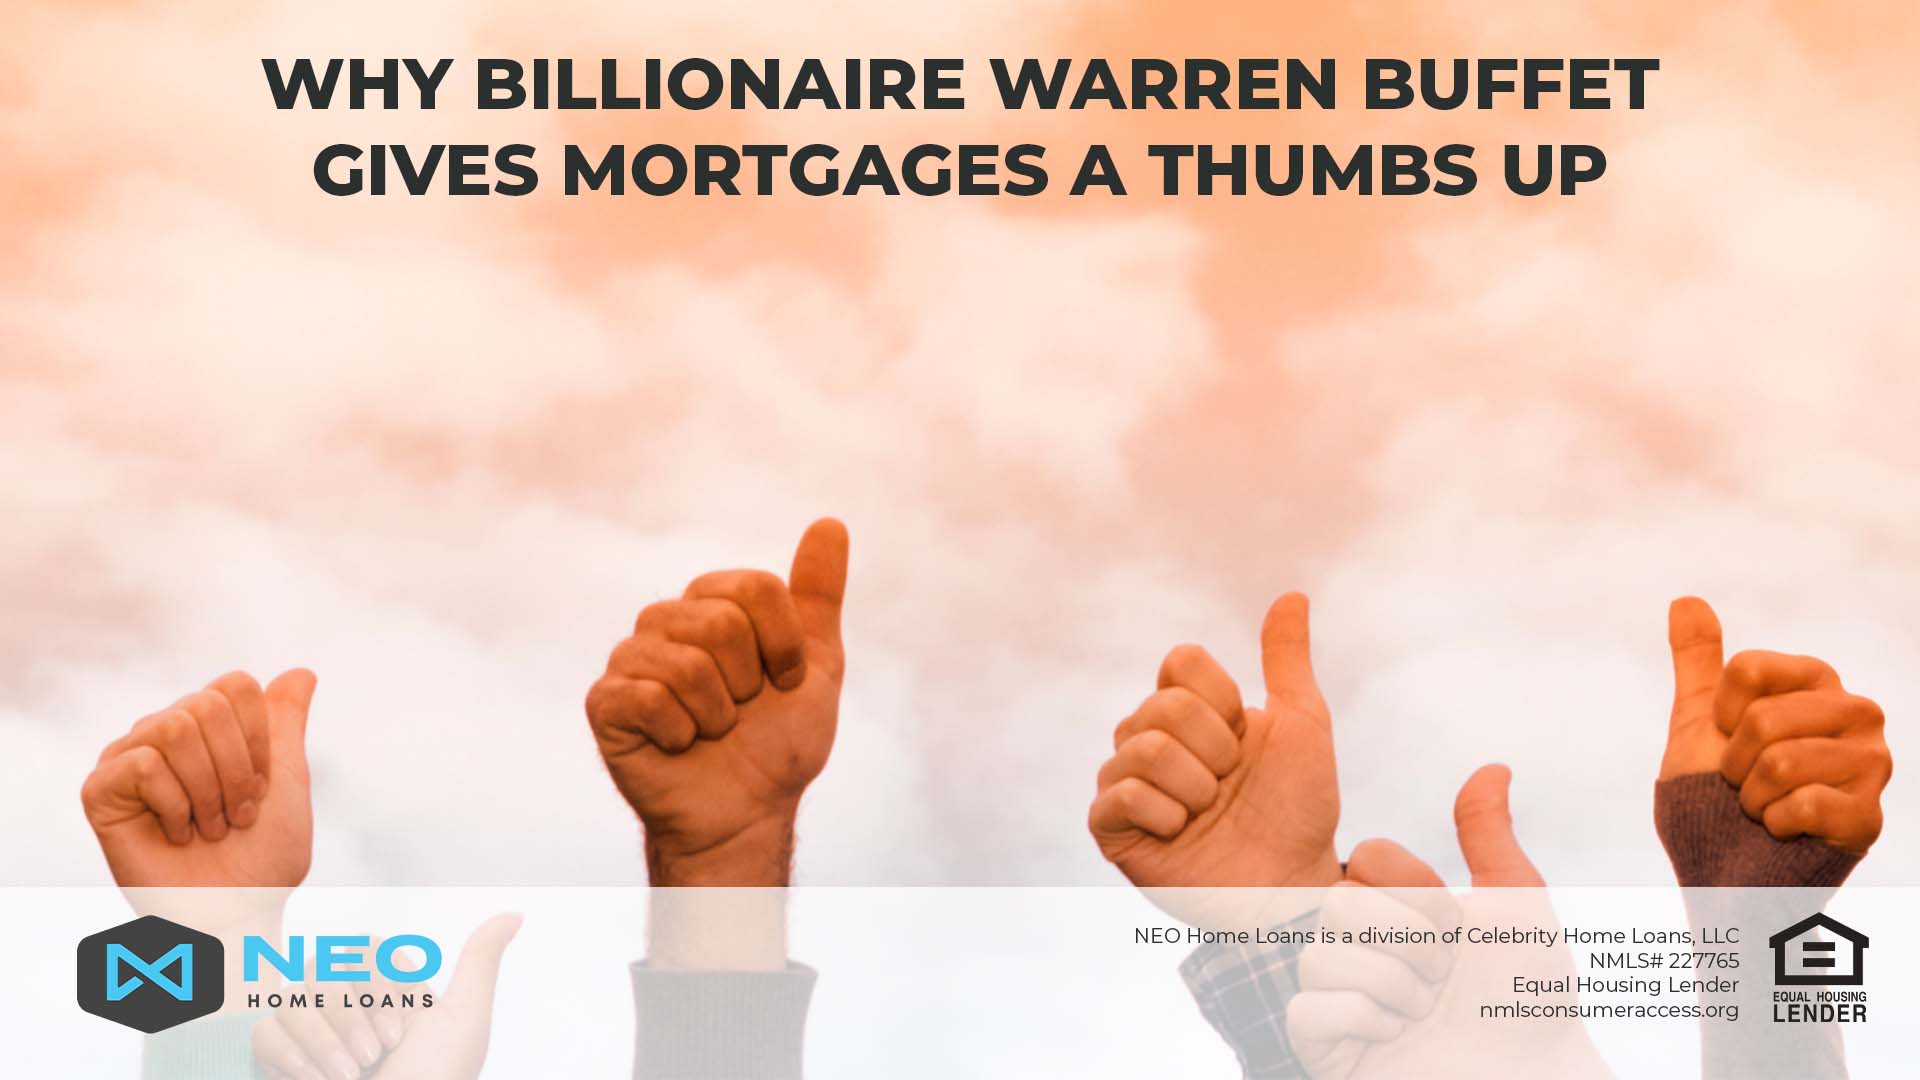 Why Billionaire Warren Buffett Gives Mortgages a Thumbs Up